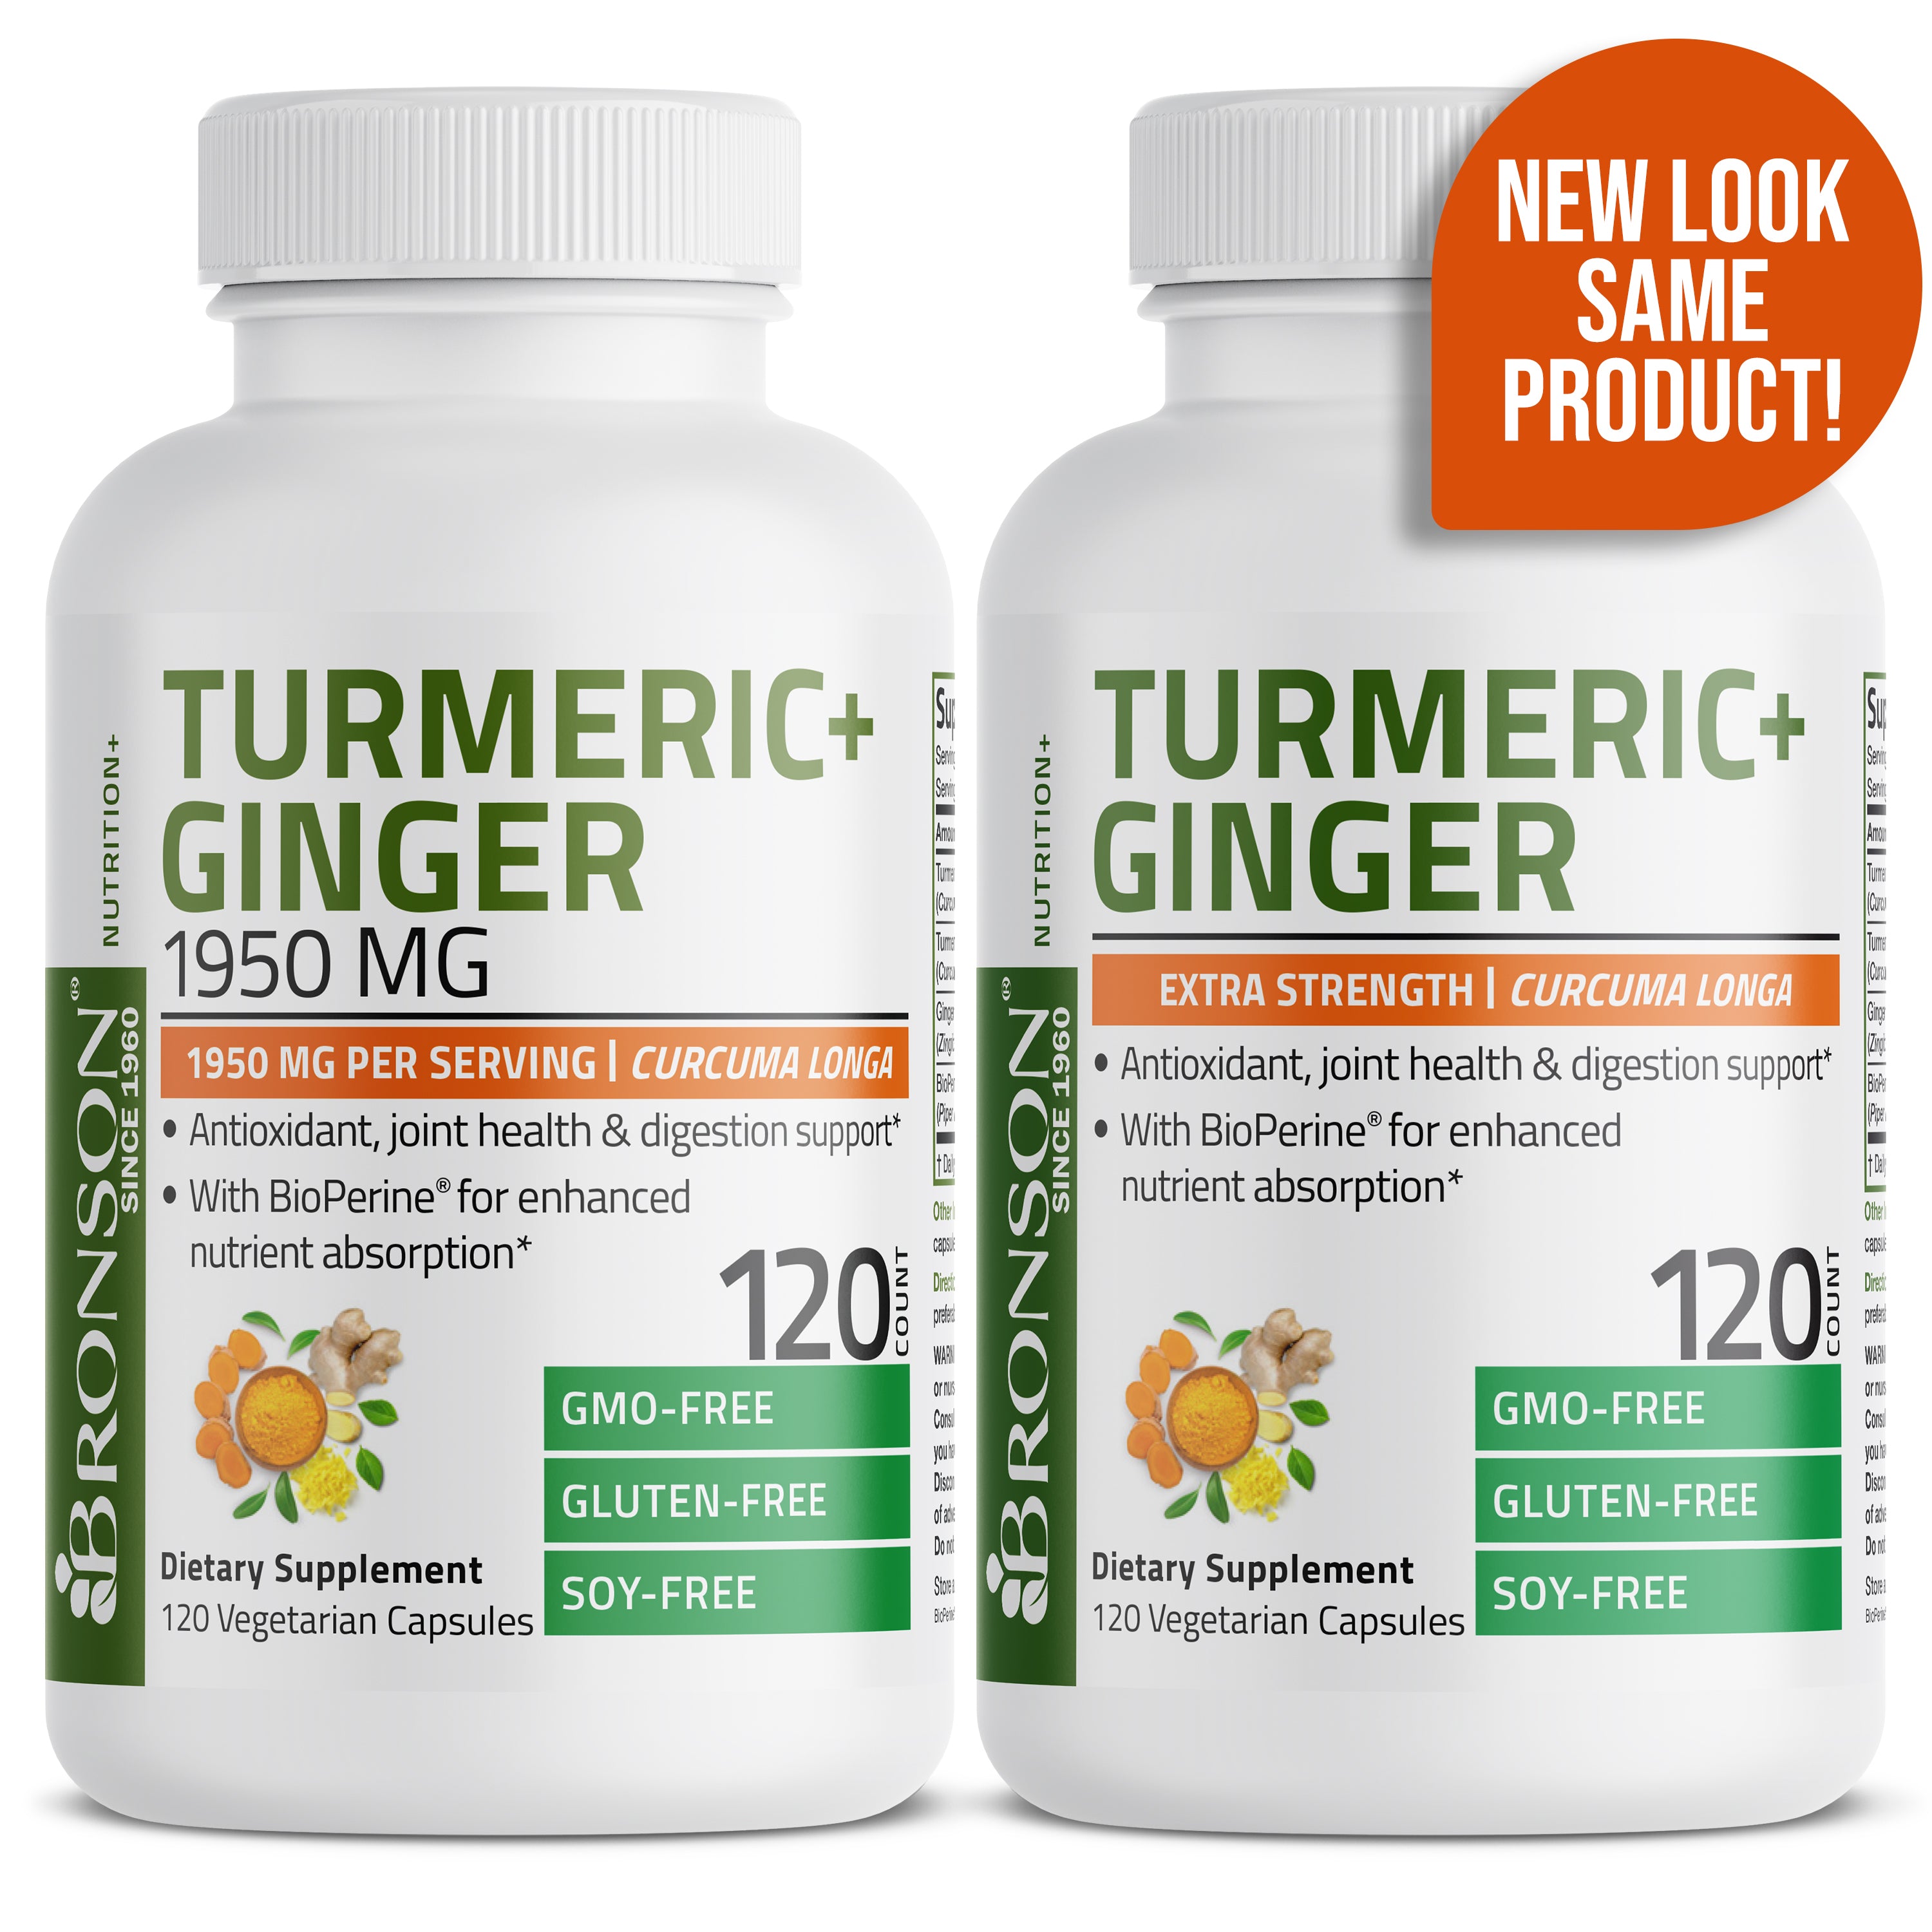 Turmeric + Ginger 1950 MG view 8 of 15